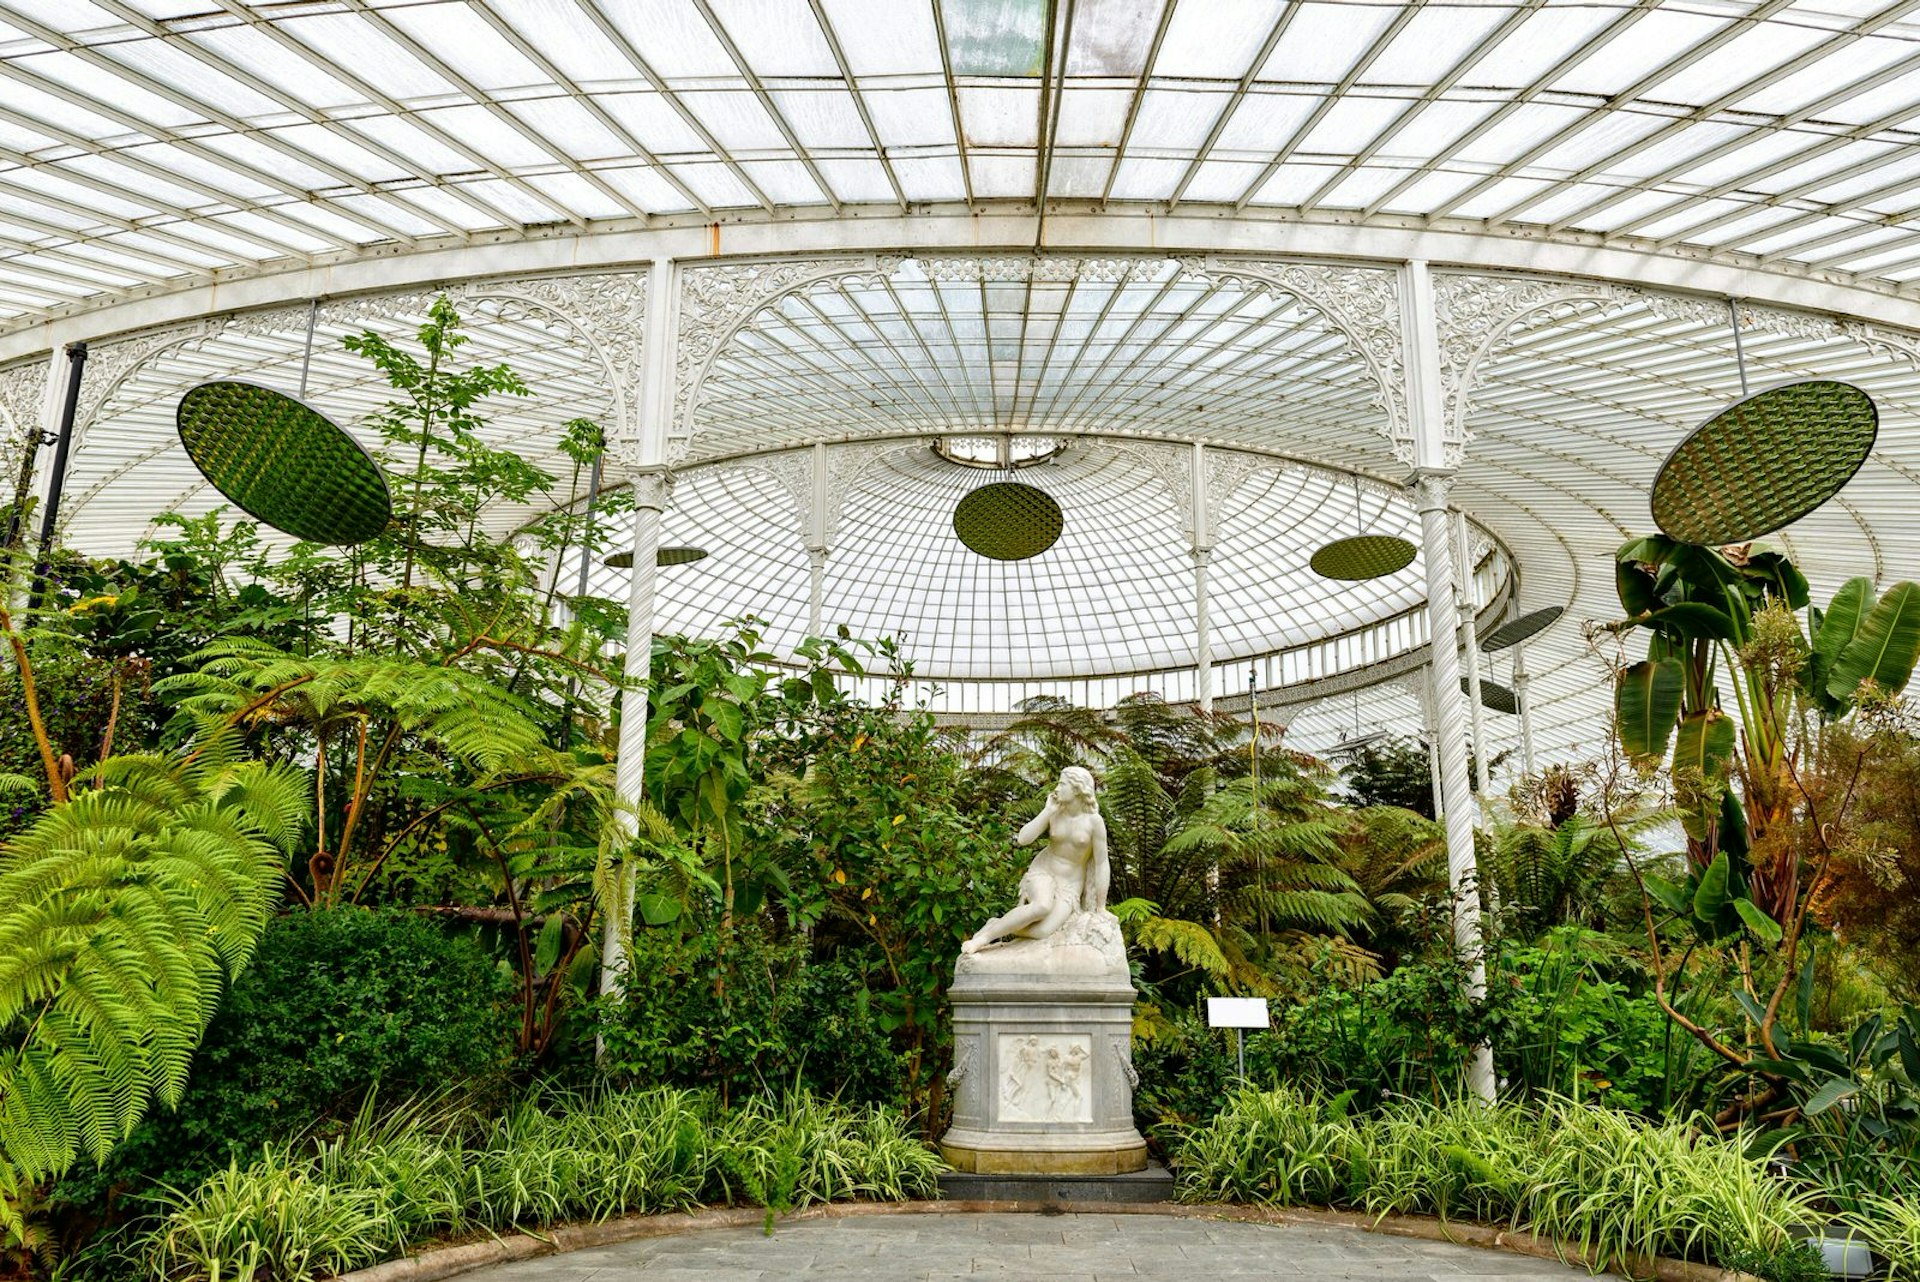 Kibble Palace, a Victorian glasshouse, sits in Glasgow's lovely Botanic Gardens © Matthi / Shutterstock 